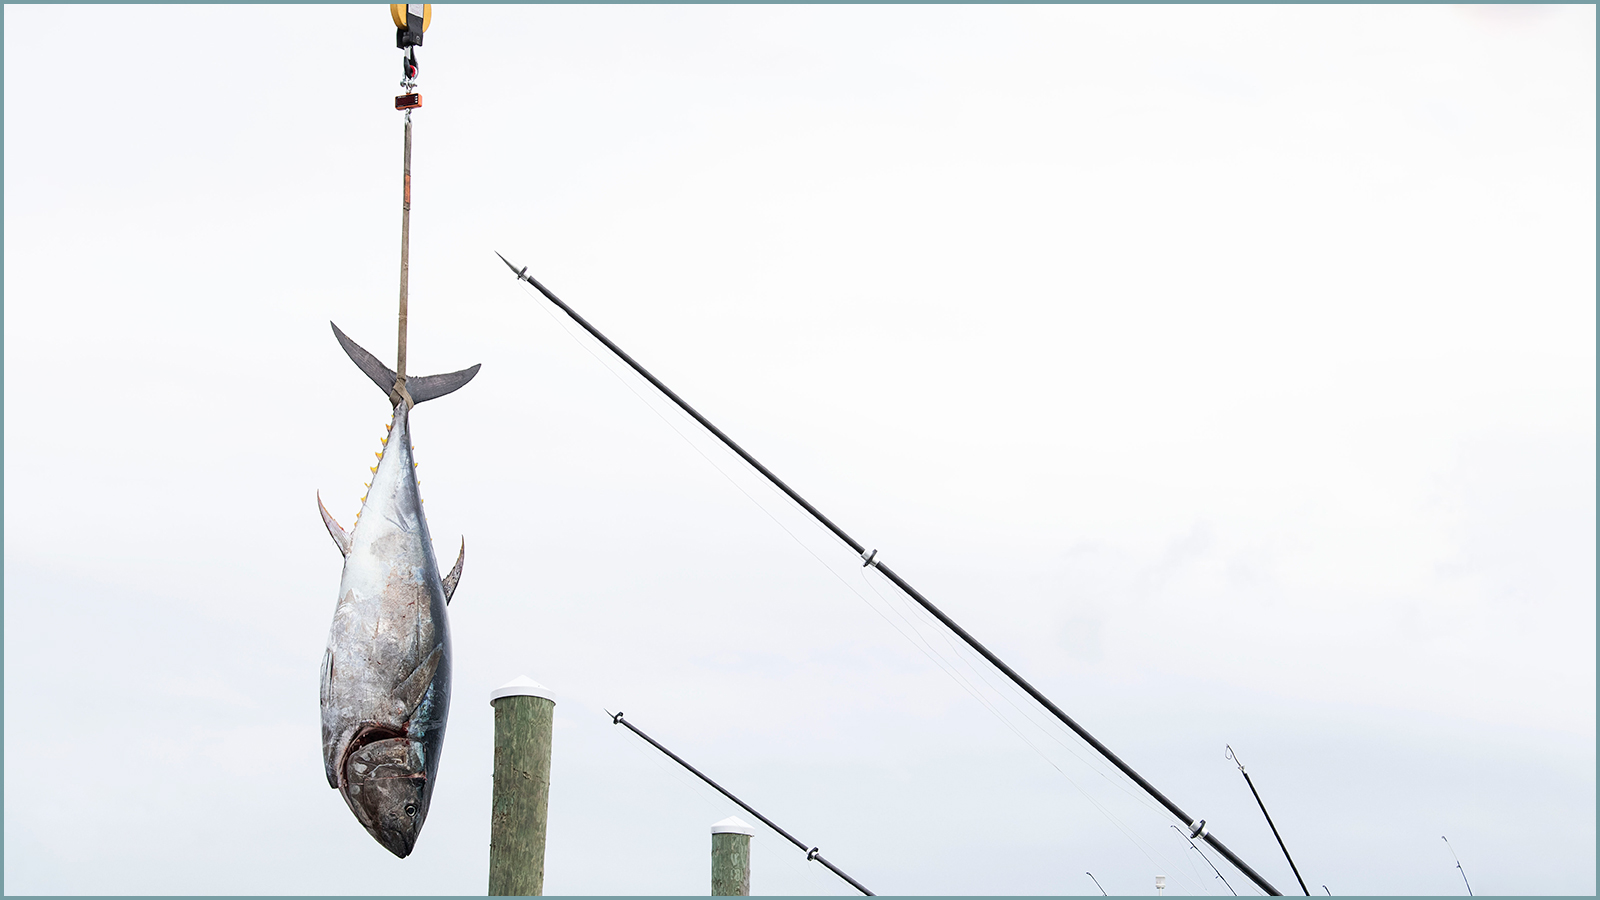 featured image for Coastal Conversations Radio Program: From the Sea Up (episode 3): Groundfish and Atlantic Bluefin Tuna